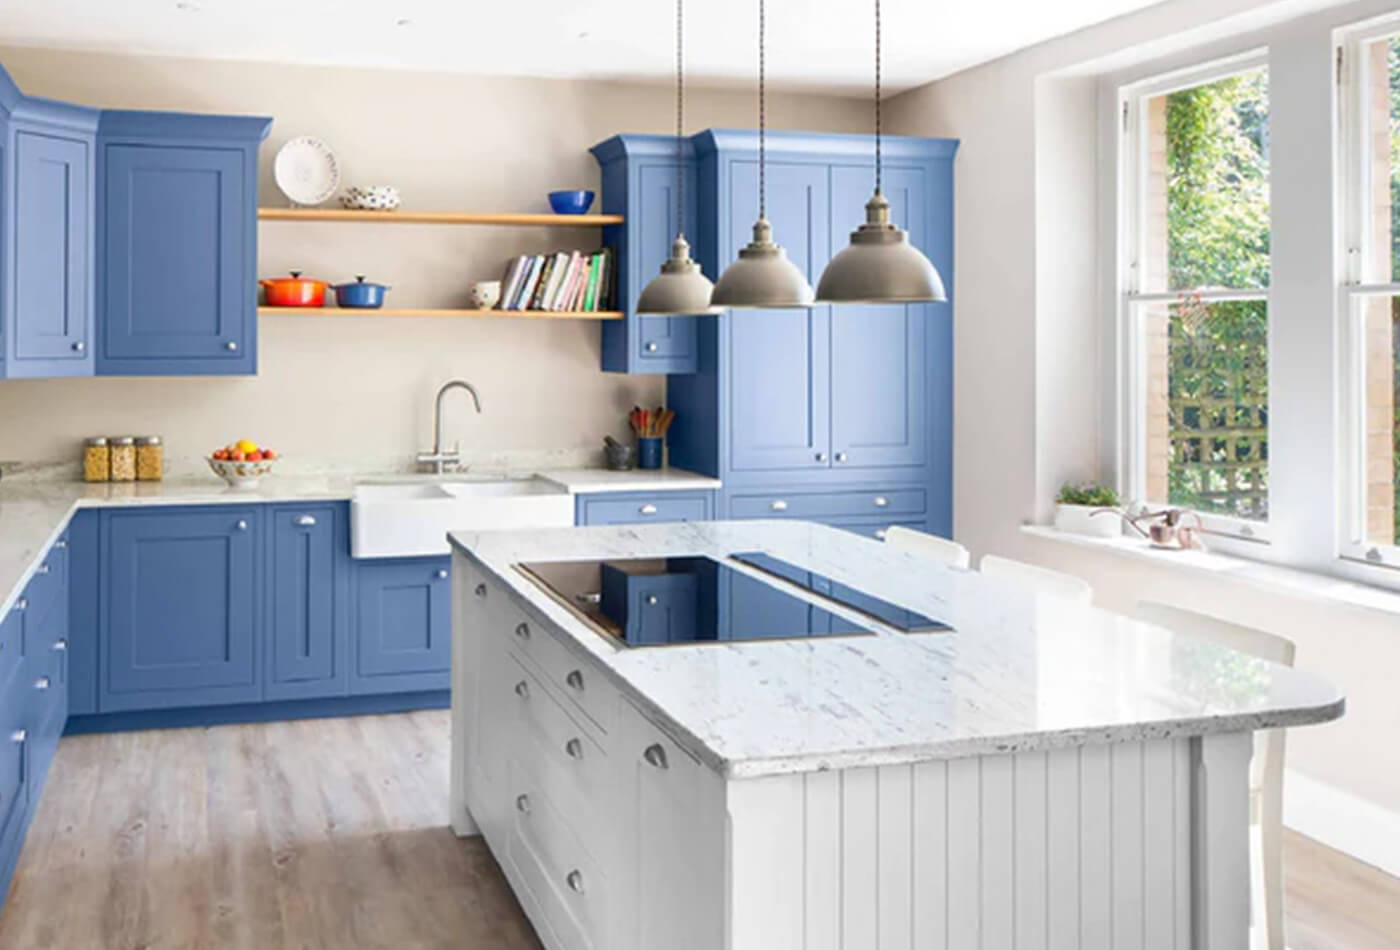 Replace Your Cooking Station With Pre-Made Worktops